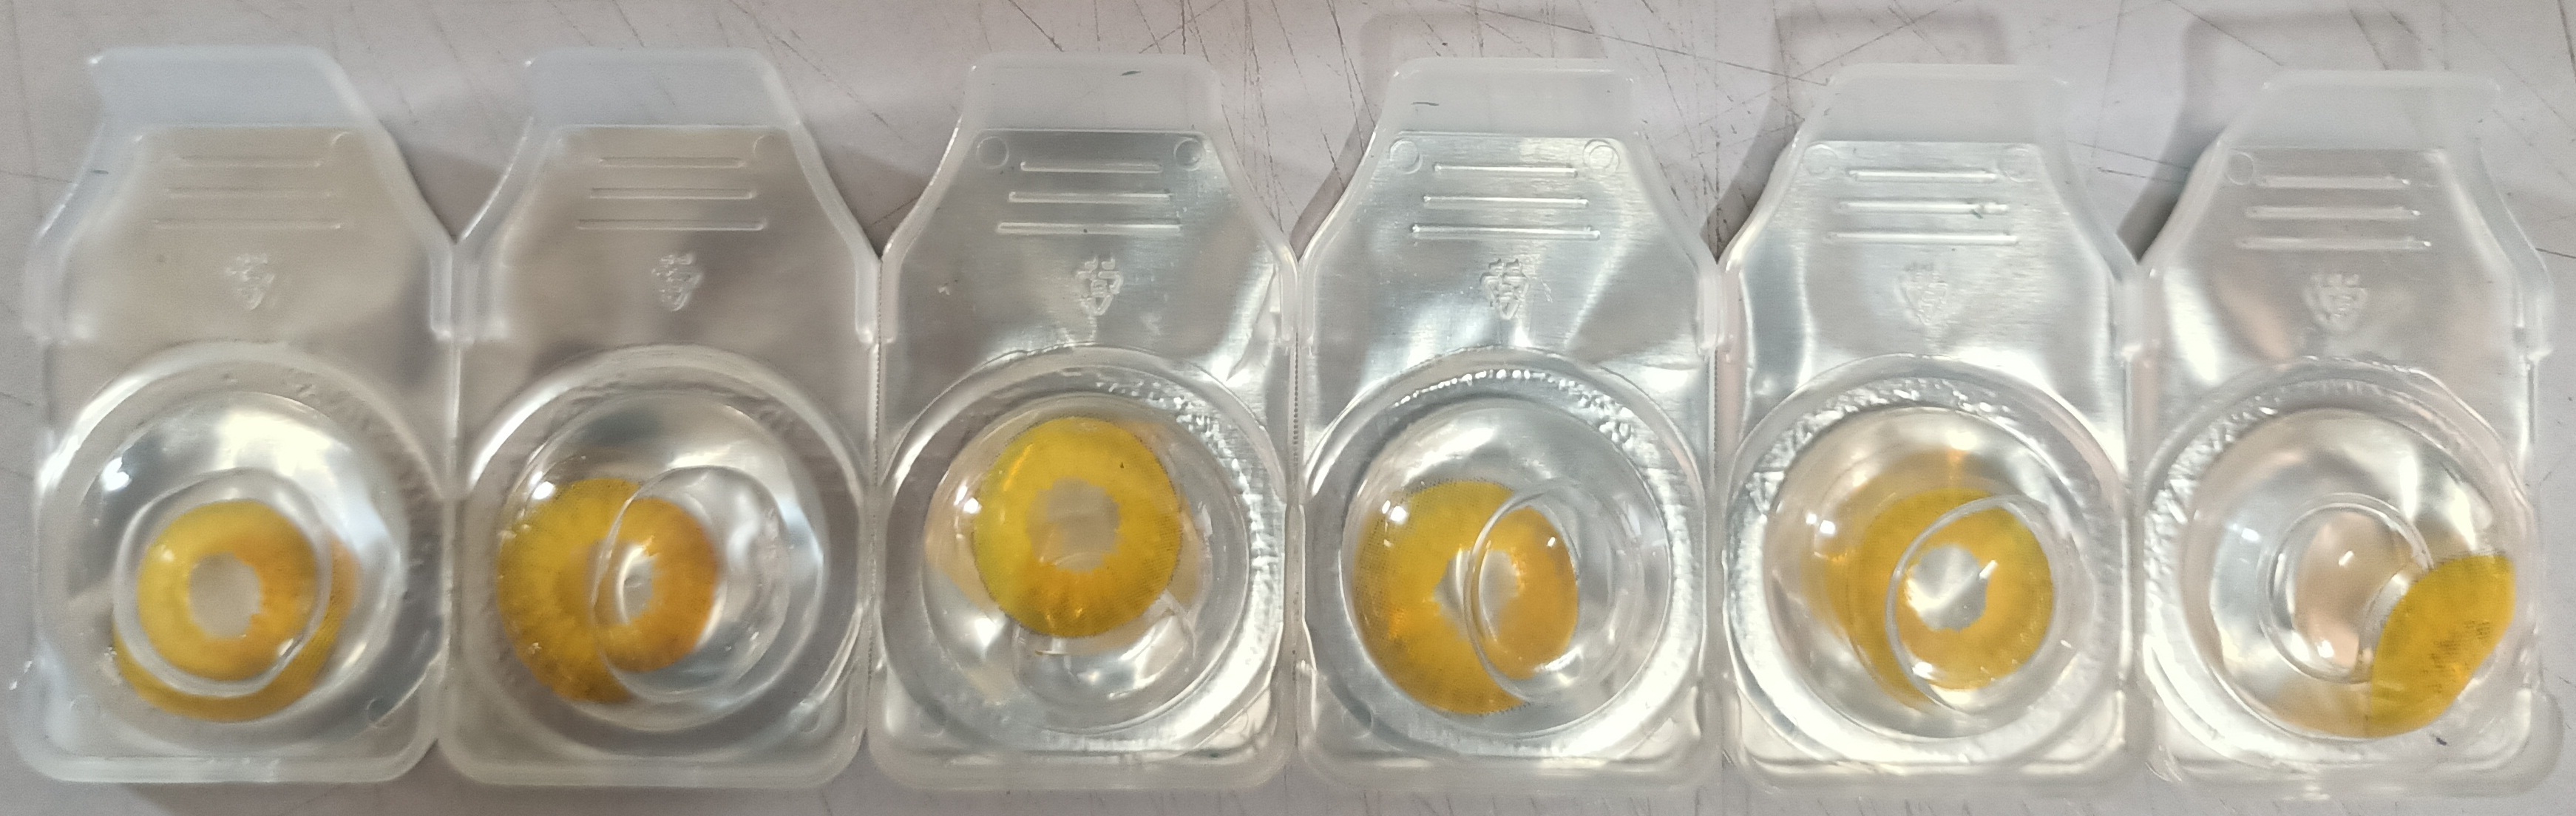 colored Crazy One Day Lenses  Horror  Contact Lenses